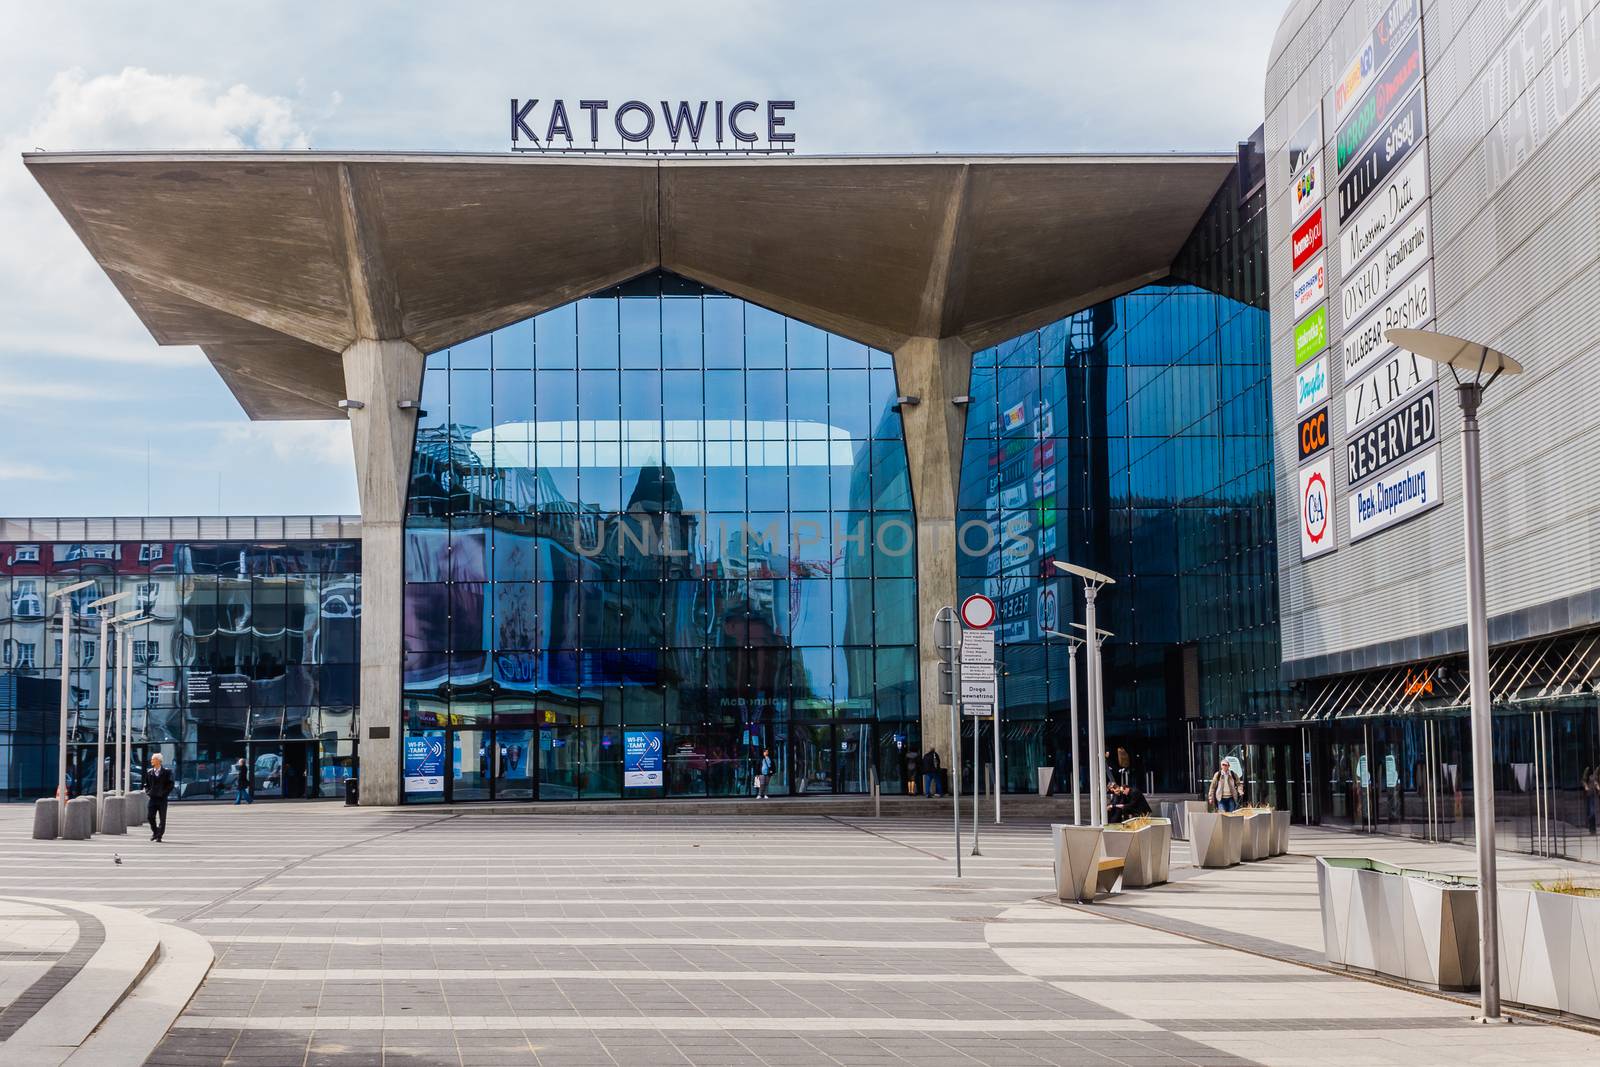 New railway station in Katowice, considered the most modern in the country. Together with Galeria Katowicka mall forms one of the most modern shopping-travel complex in Poland.